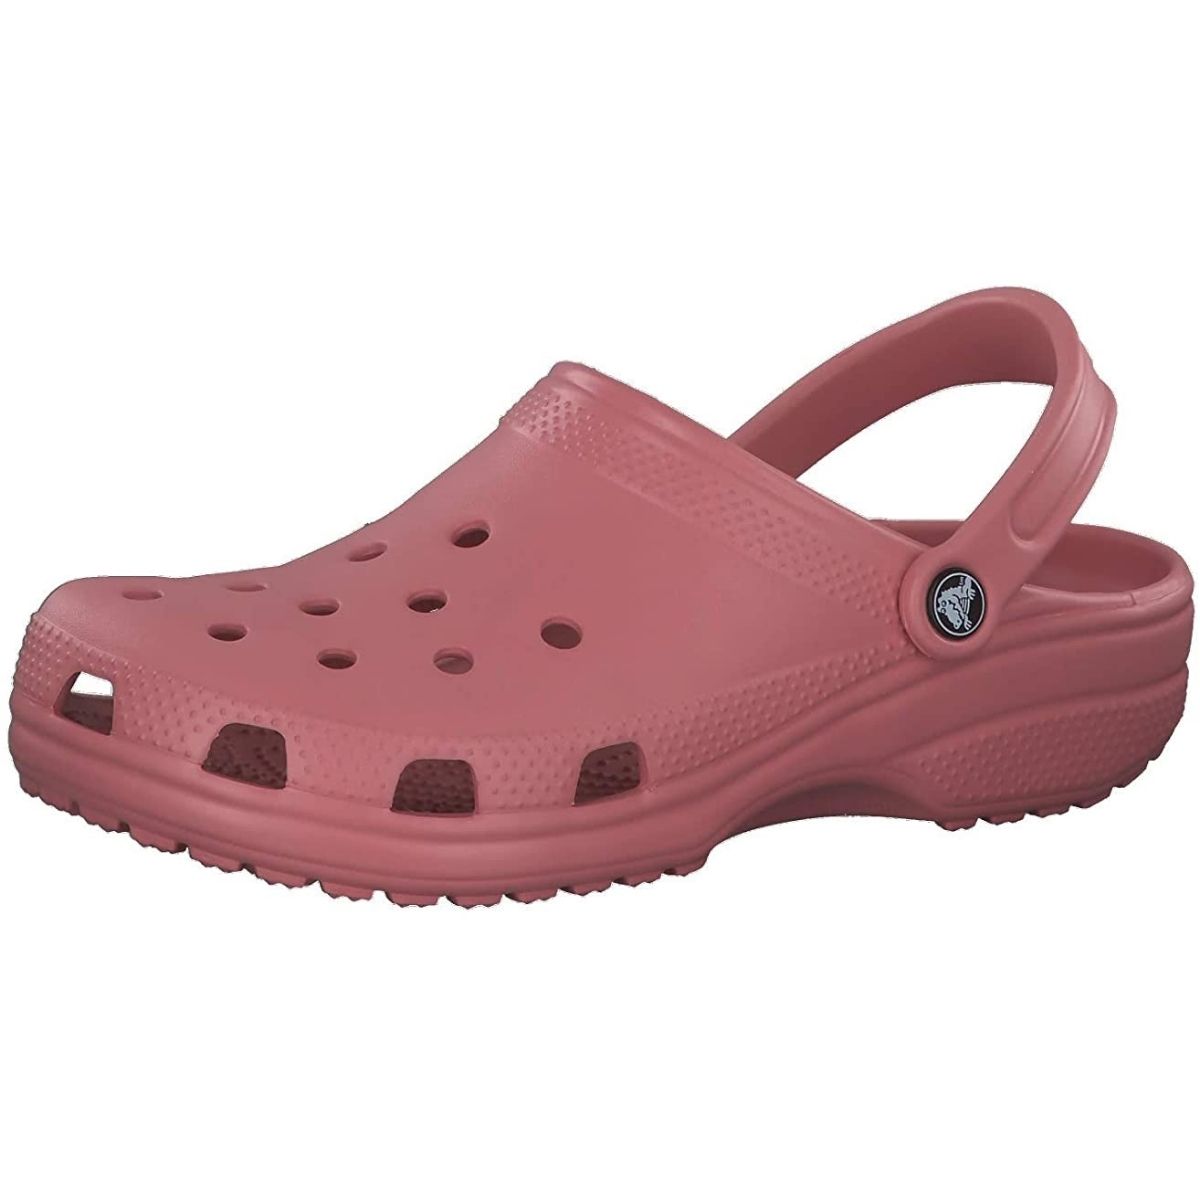 The Gifts for Gardeners Option: Crocs Men’s and Women’s Classic Clog